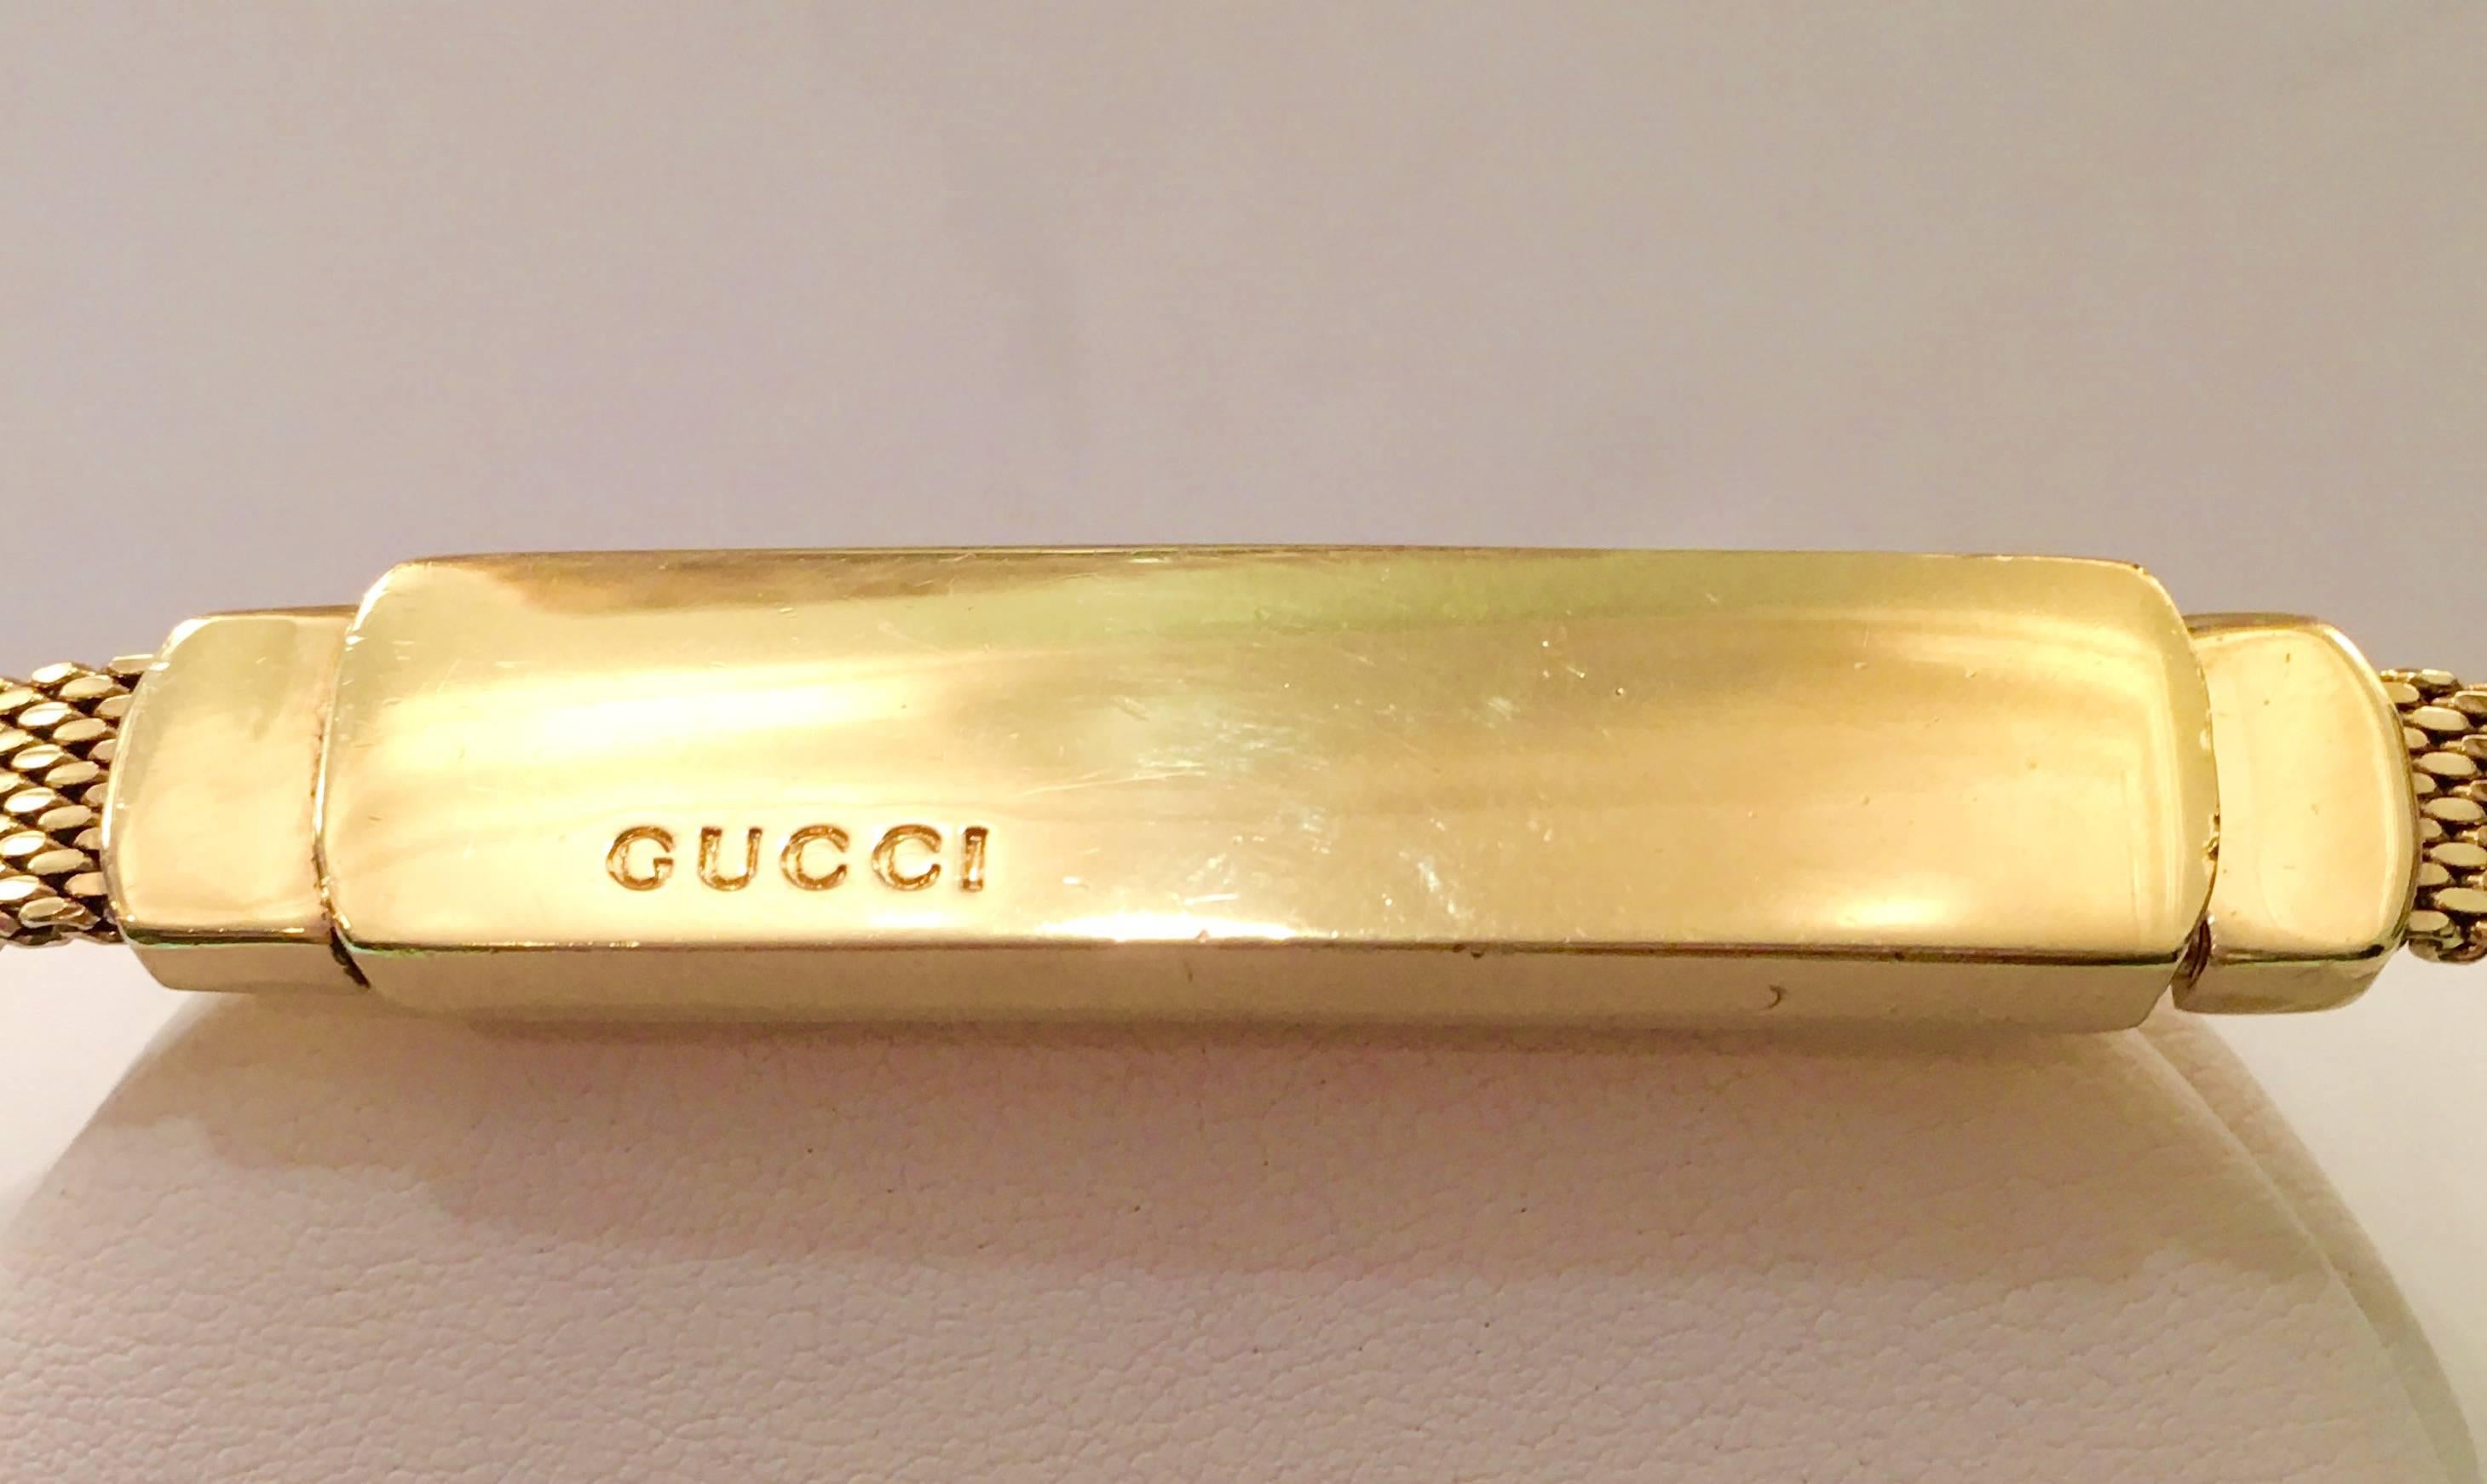 Gucci Tom Ford designed gold plate snake mesh clip buckle belt. Super rare, collectible belt from Tom Ford's days at Gucci. Made from heavy gold plate 'snake' mesh with GUCCI logo engraved on front of  buckle. Engraved on the back side of the